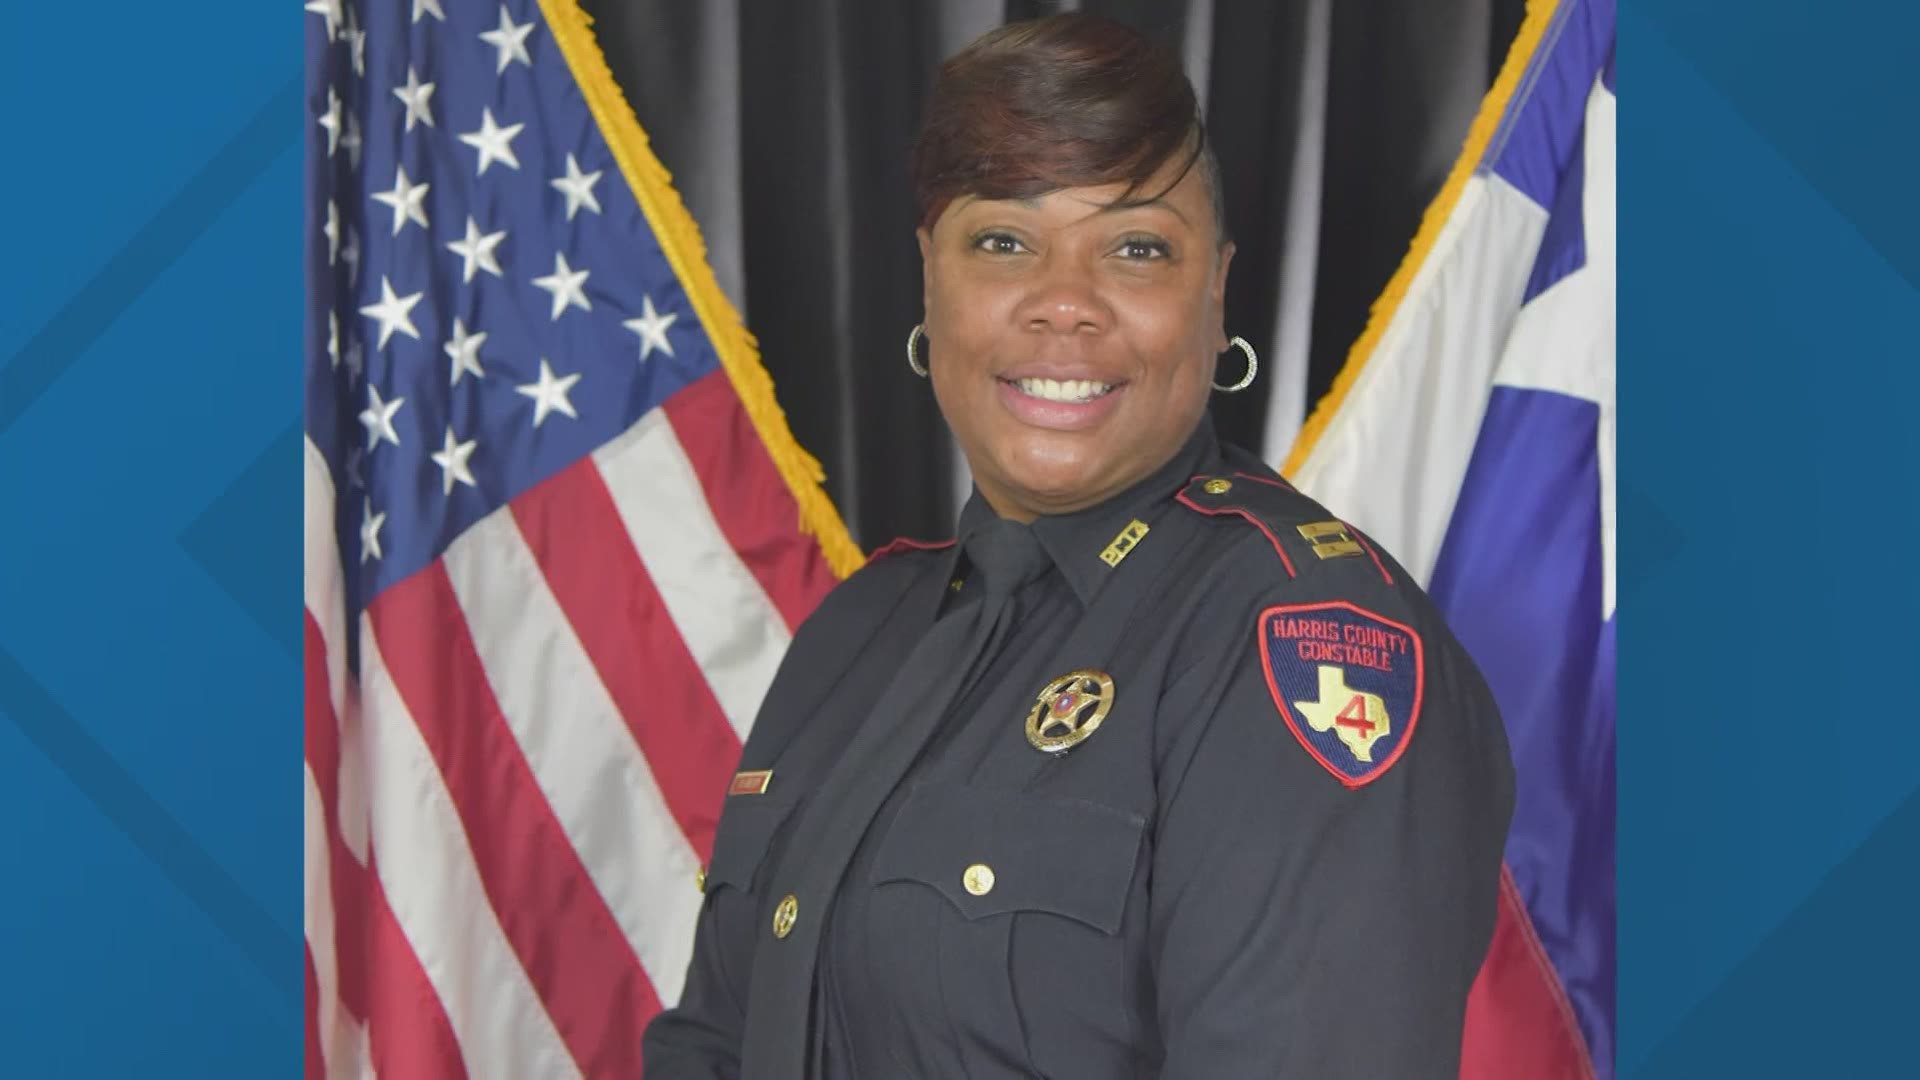 Nicole Allen has been with the Harris County Precinct 4 Constable’s Office since 2009. She has been promoted to corporal, sergeant and lieutenant.